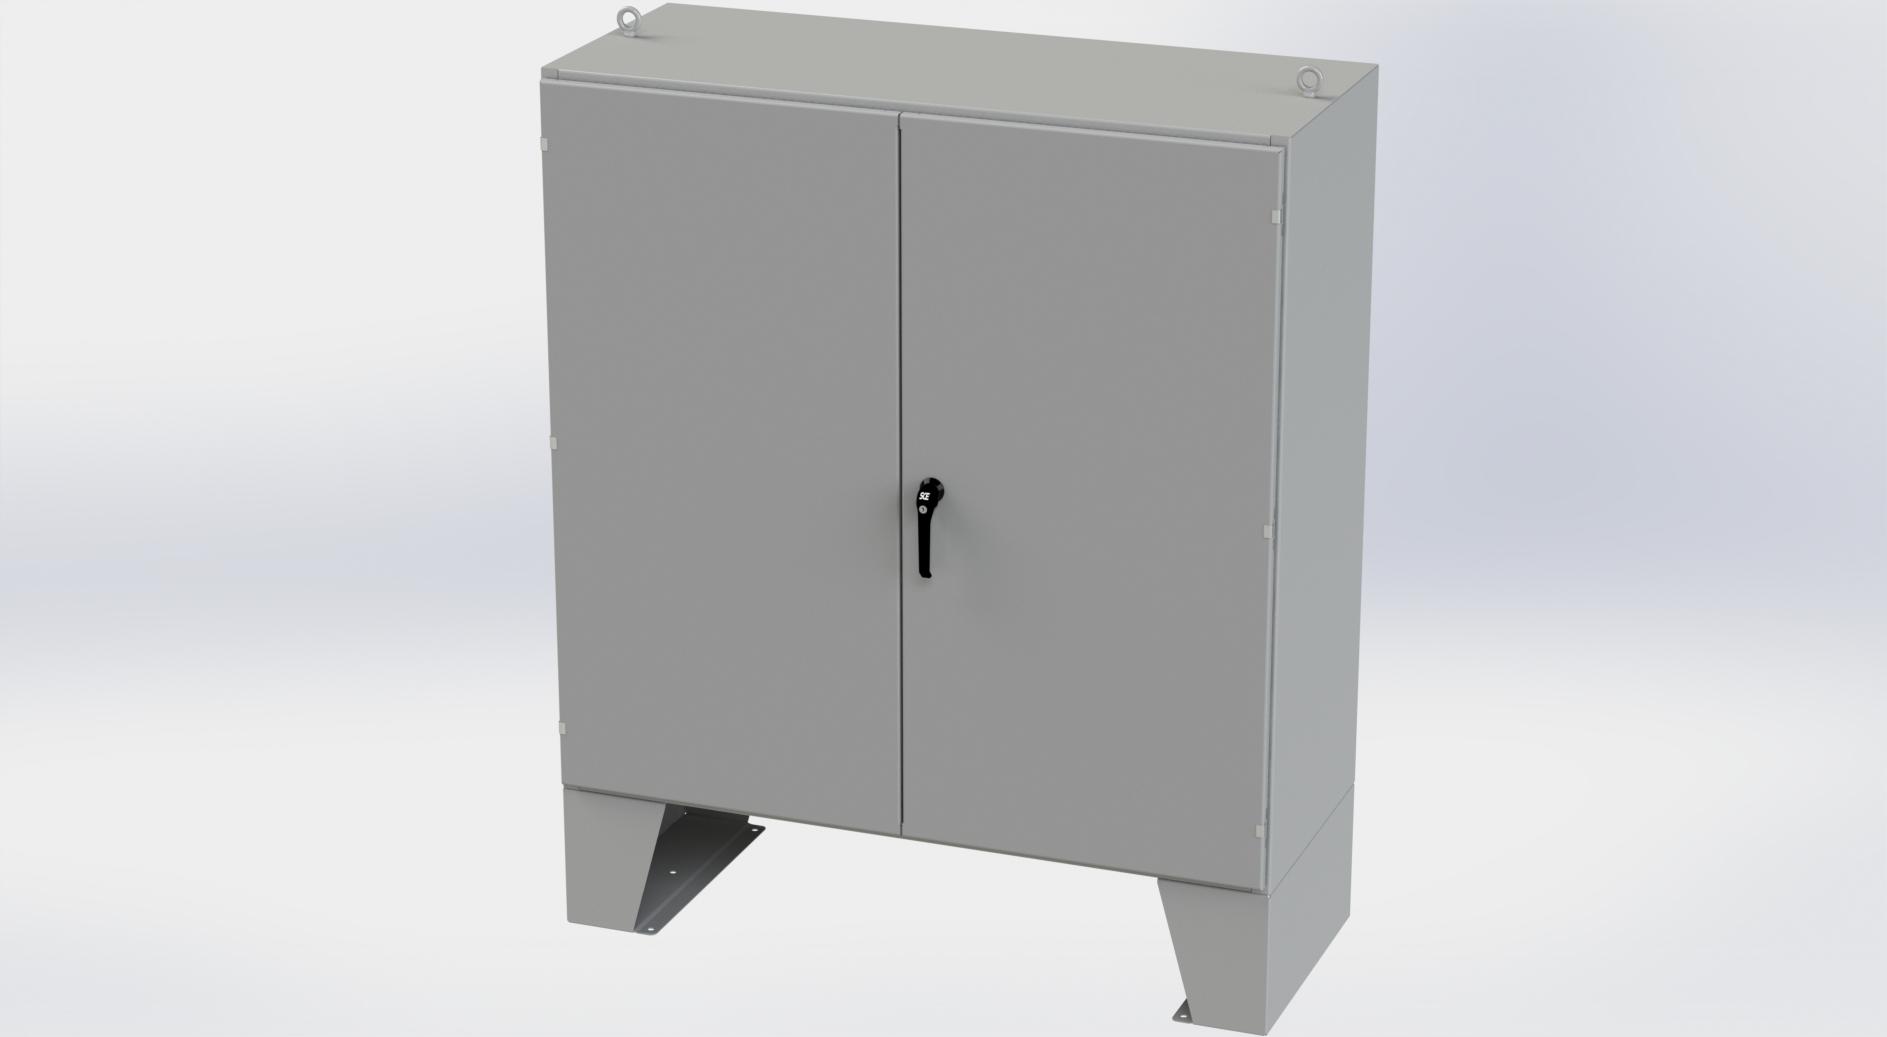 Saginaw Control SCE-606024LP 2DR LP Enclosure, Height:60.00", Width:60.00", Depth:24.00", ANSI-61 gray powder coating inside and out. Optional sub-panels are powder coated white.